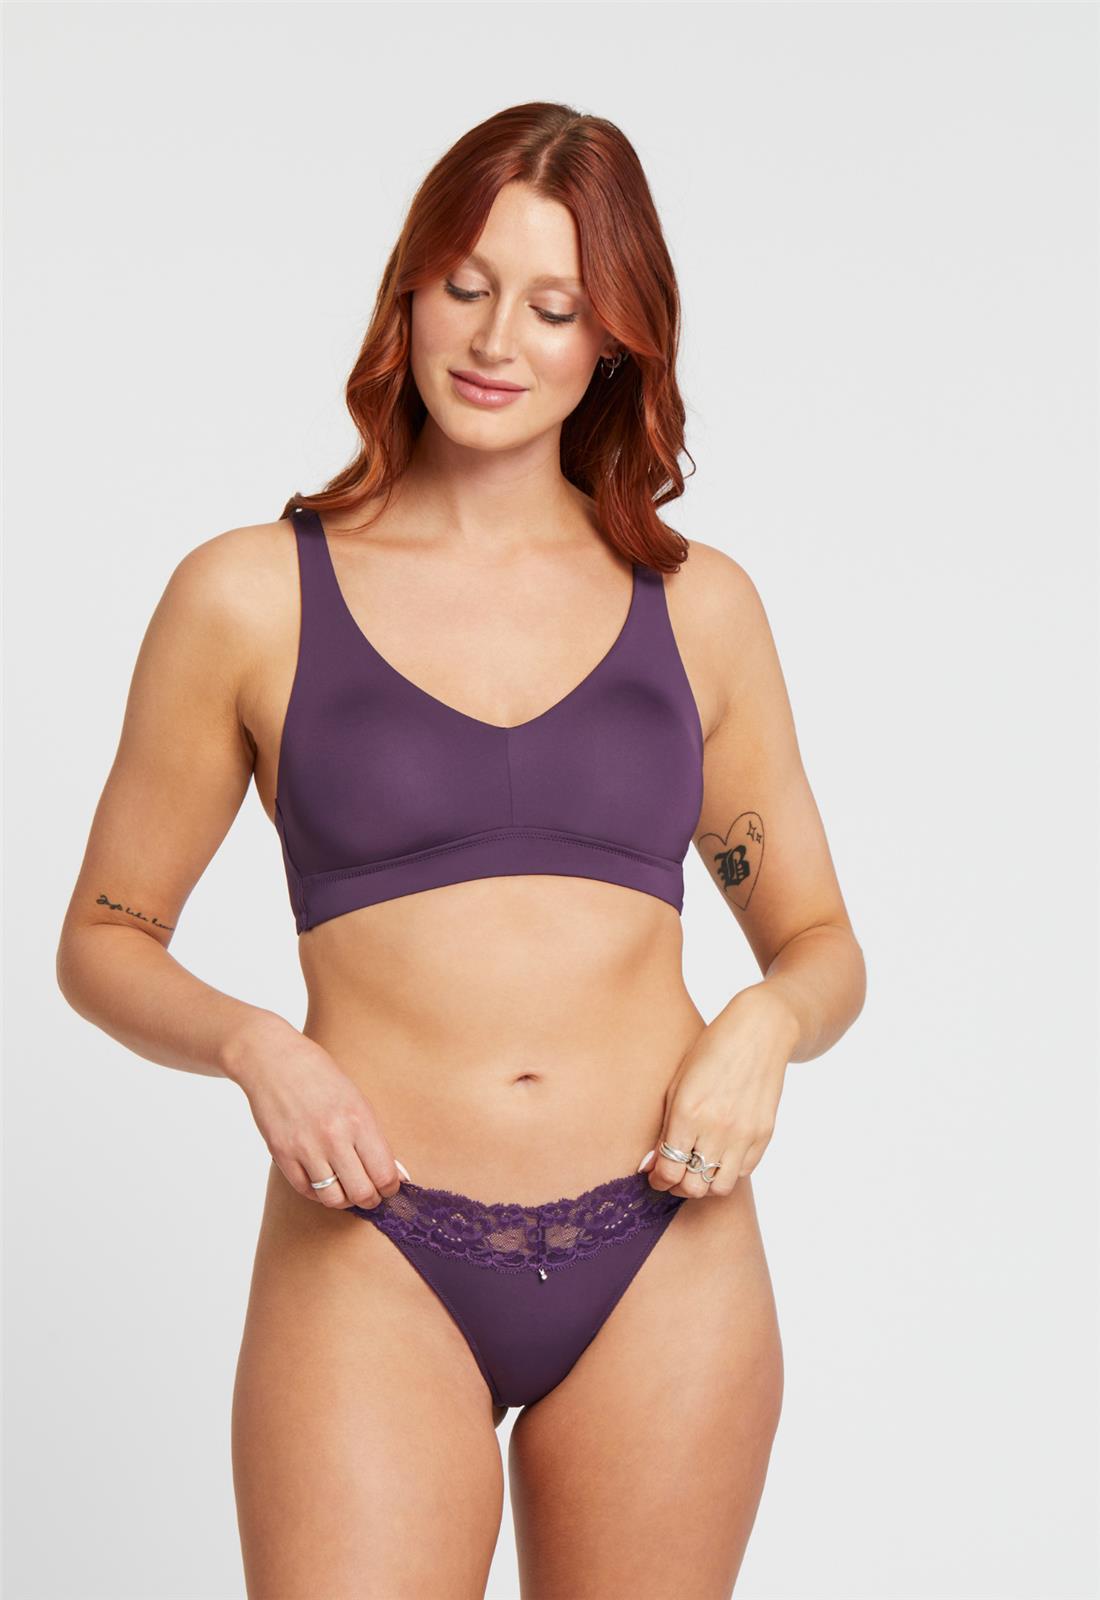 Mysa Cup-Sized Bralette - Pinot worn by model front view